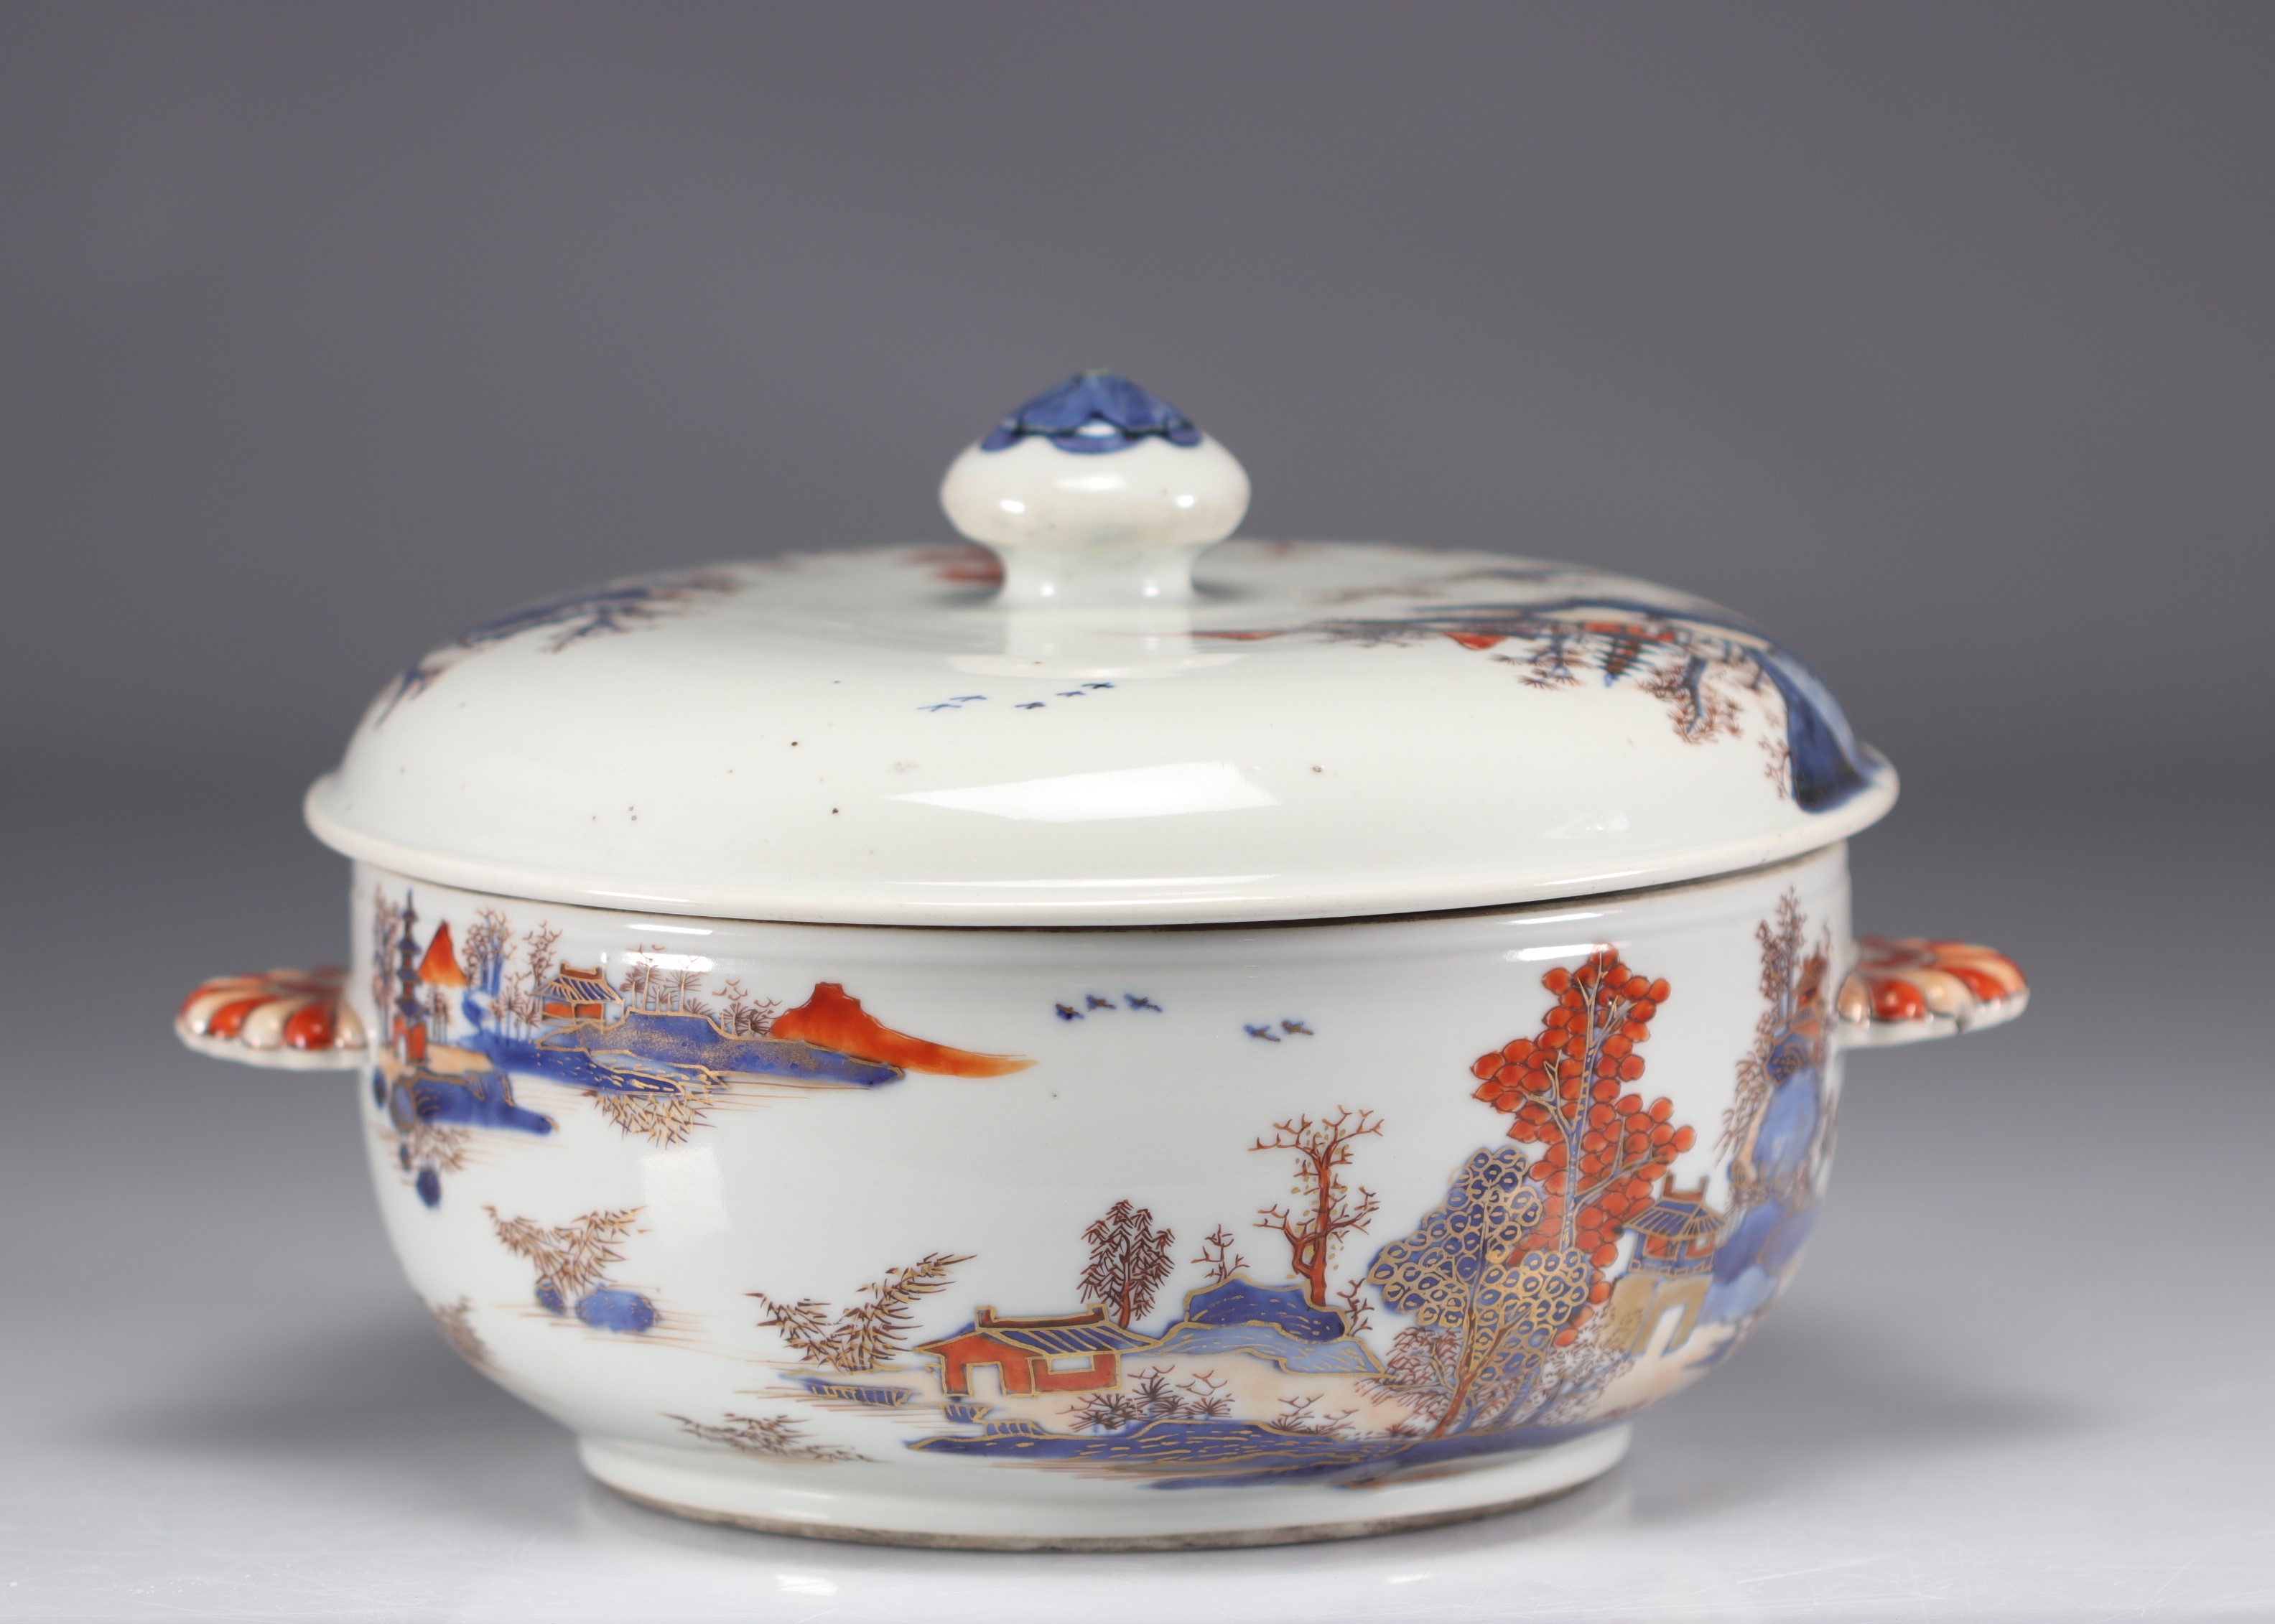 Covered dish in chinese porcelain decorated with landscapes on a white background from 18th century - Image 2 of 6